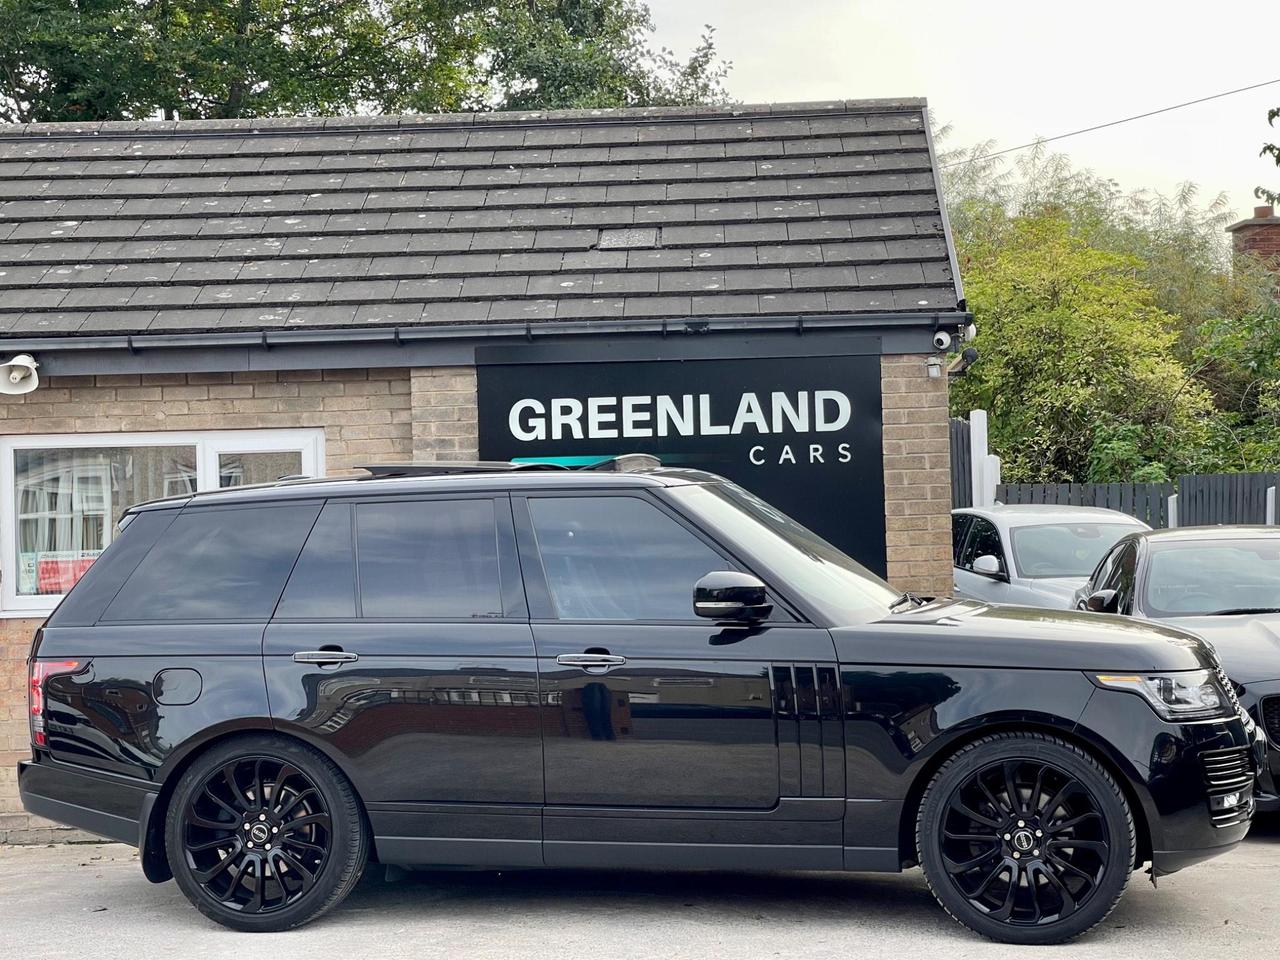 Used 2014 Land Rover Range Rover for sale in Sheffield